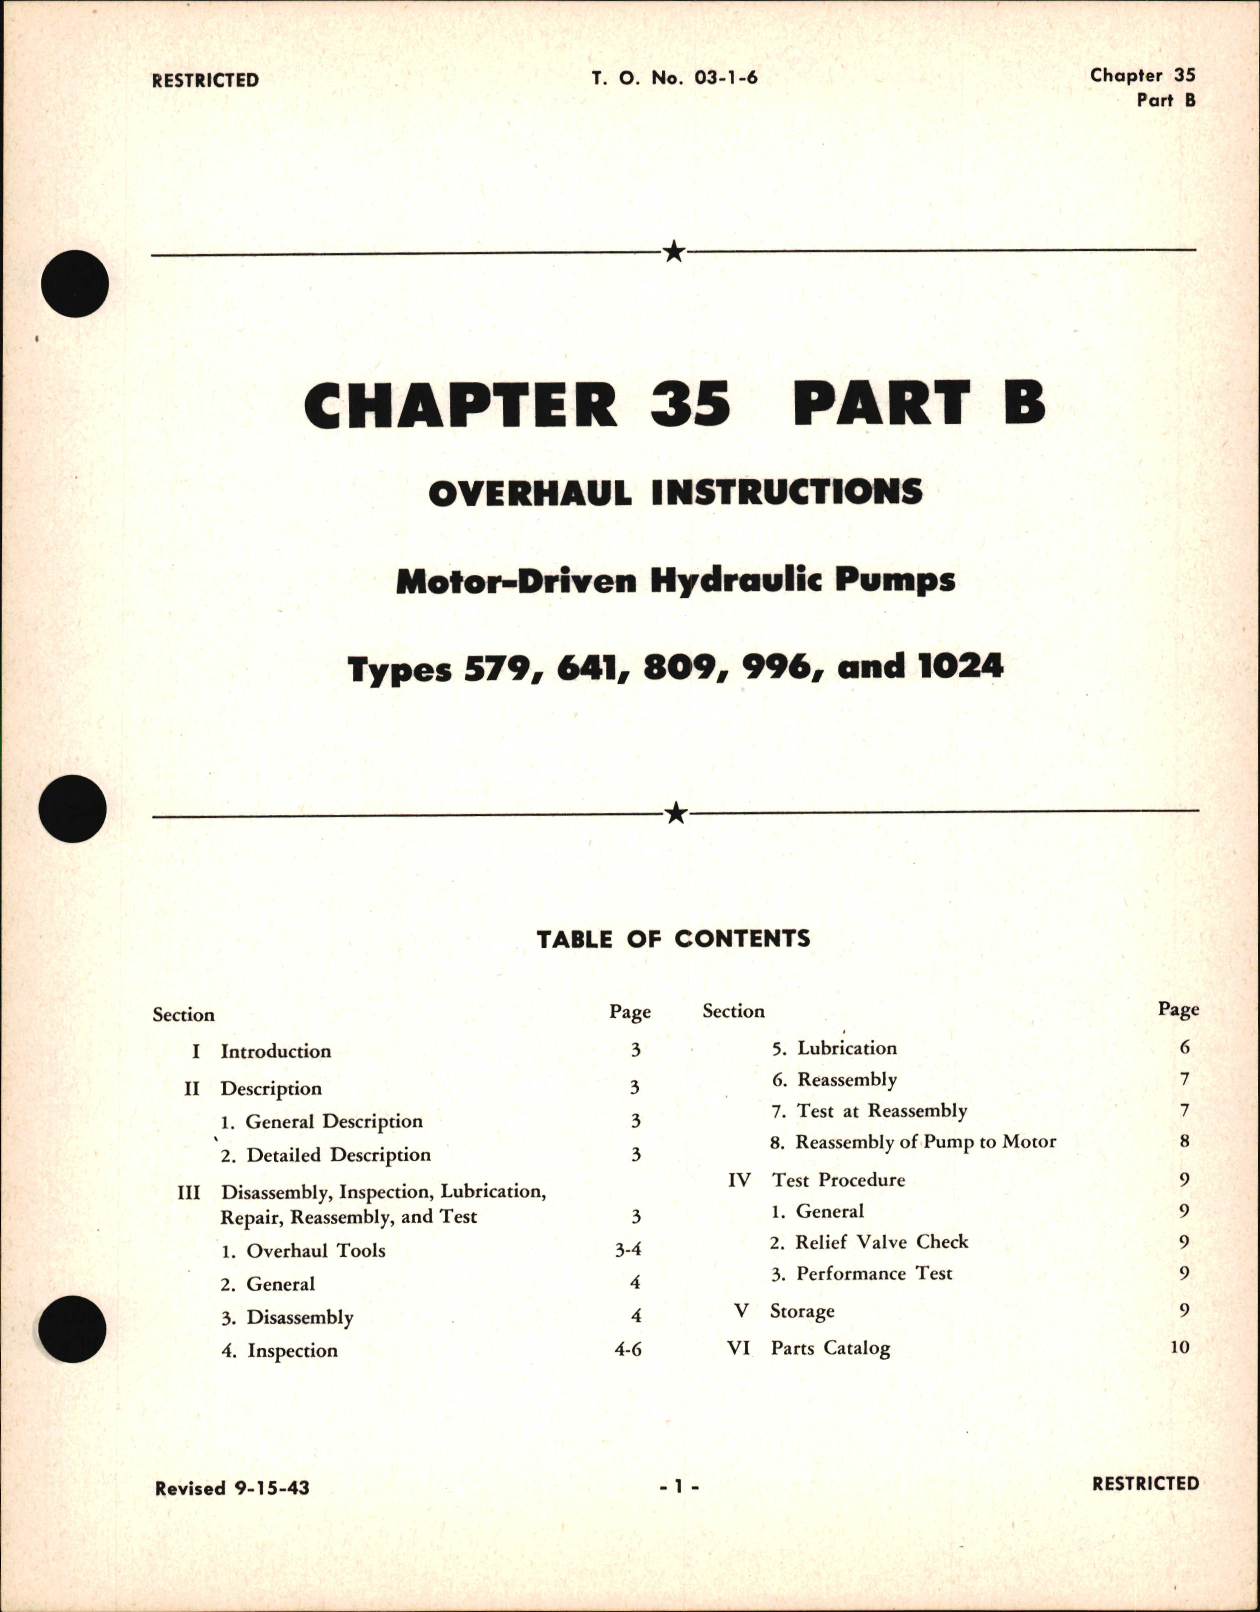 Sample page 1 from AirCorps Library document: Overhaul Instructions for Motor Driven Hydraulic Pumps, Chapter 35 Part B